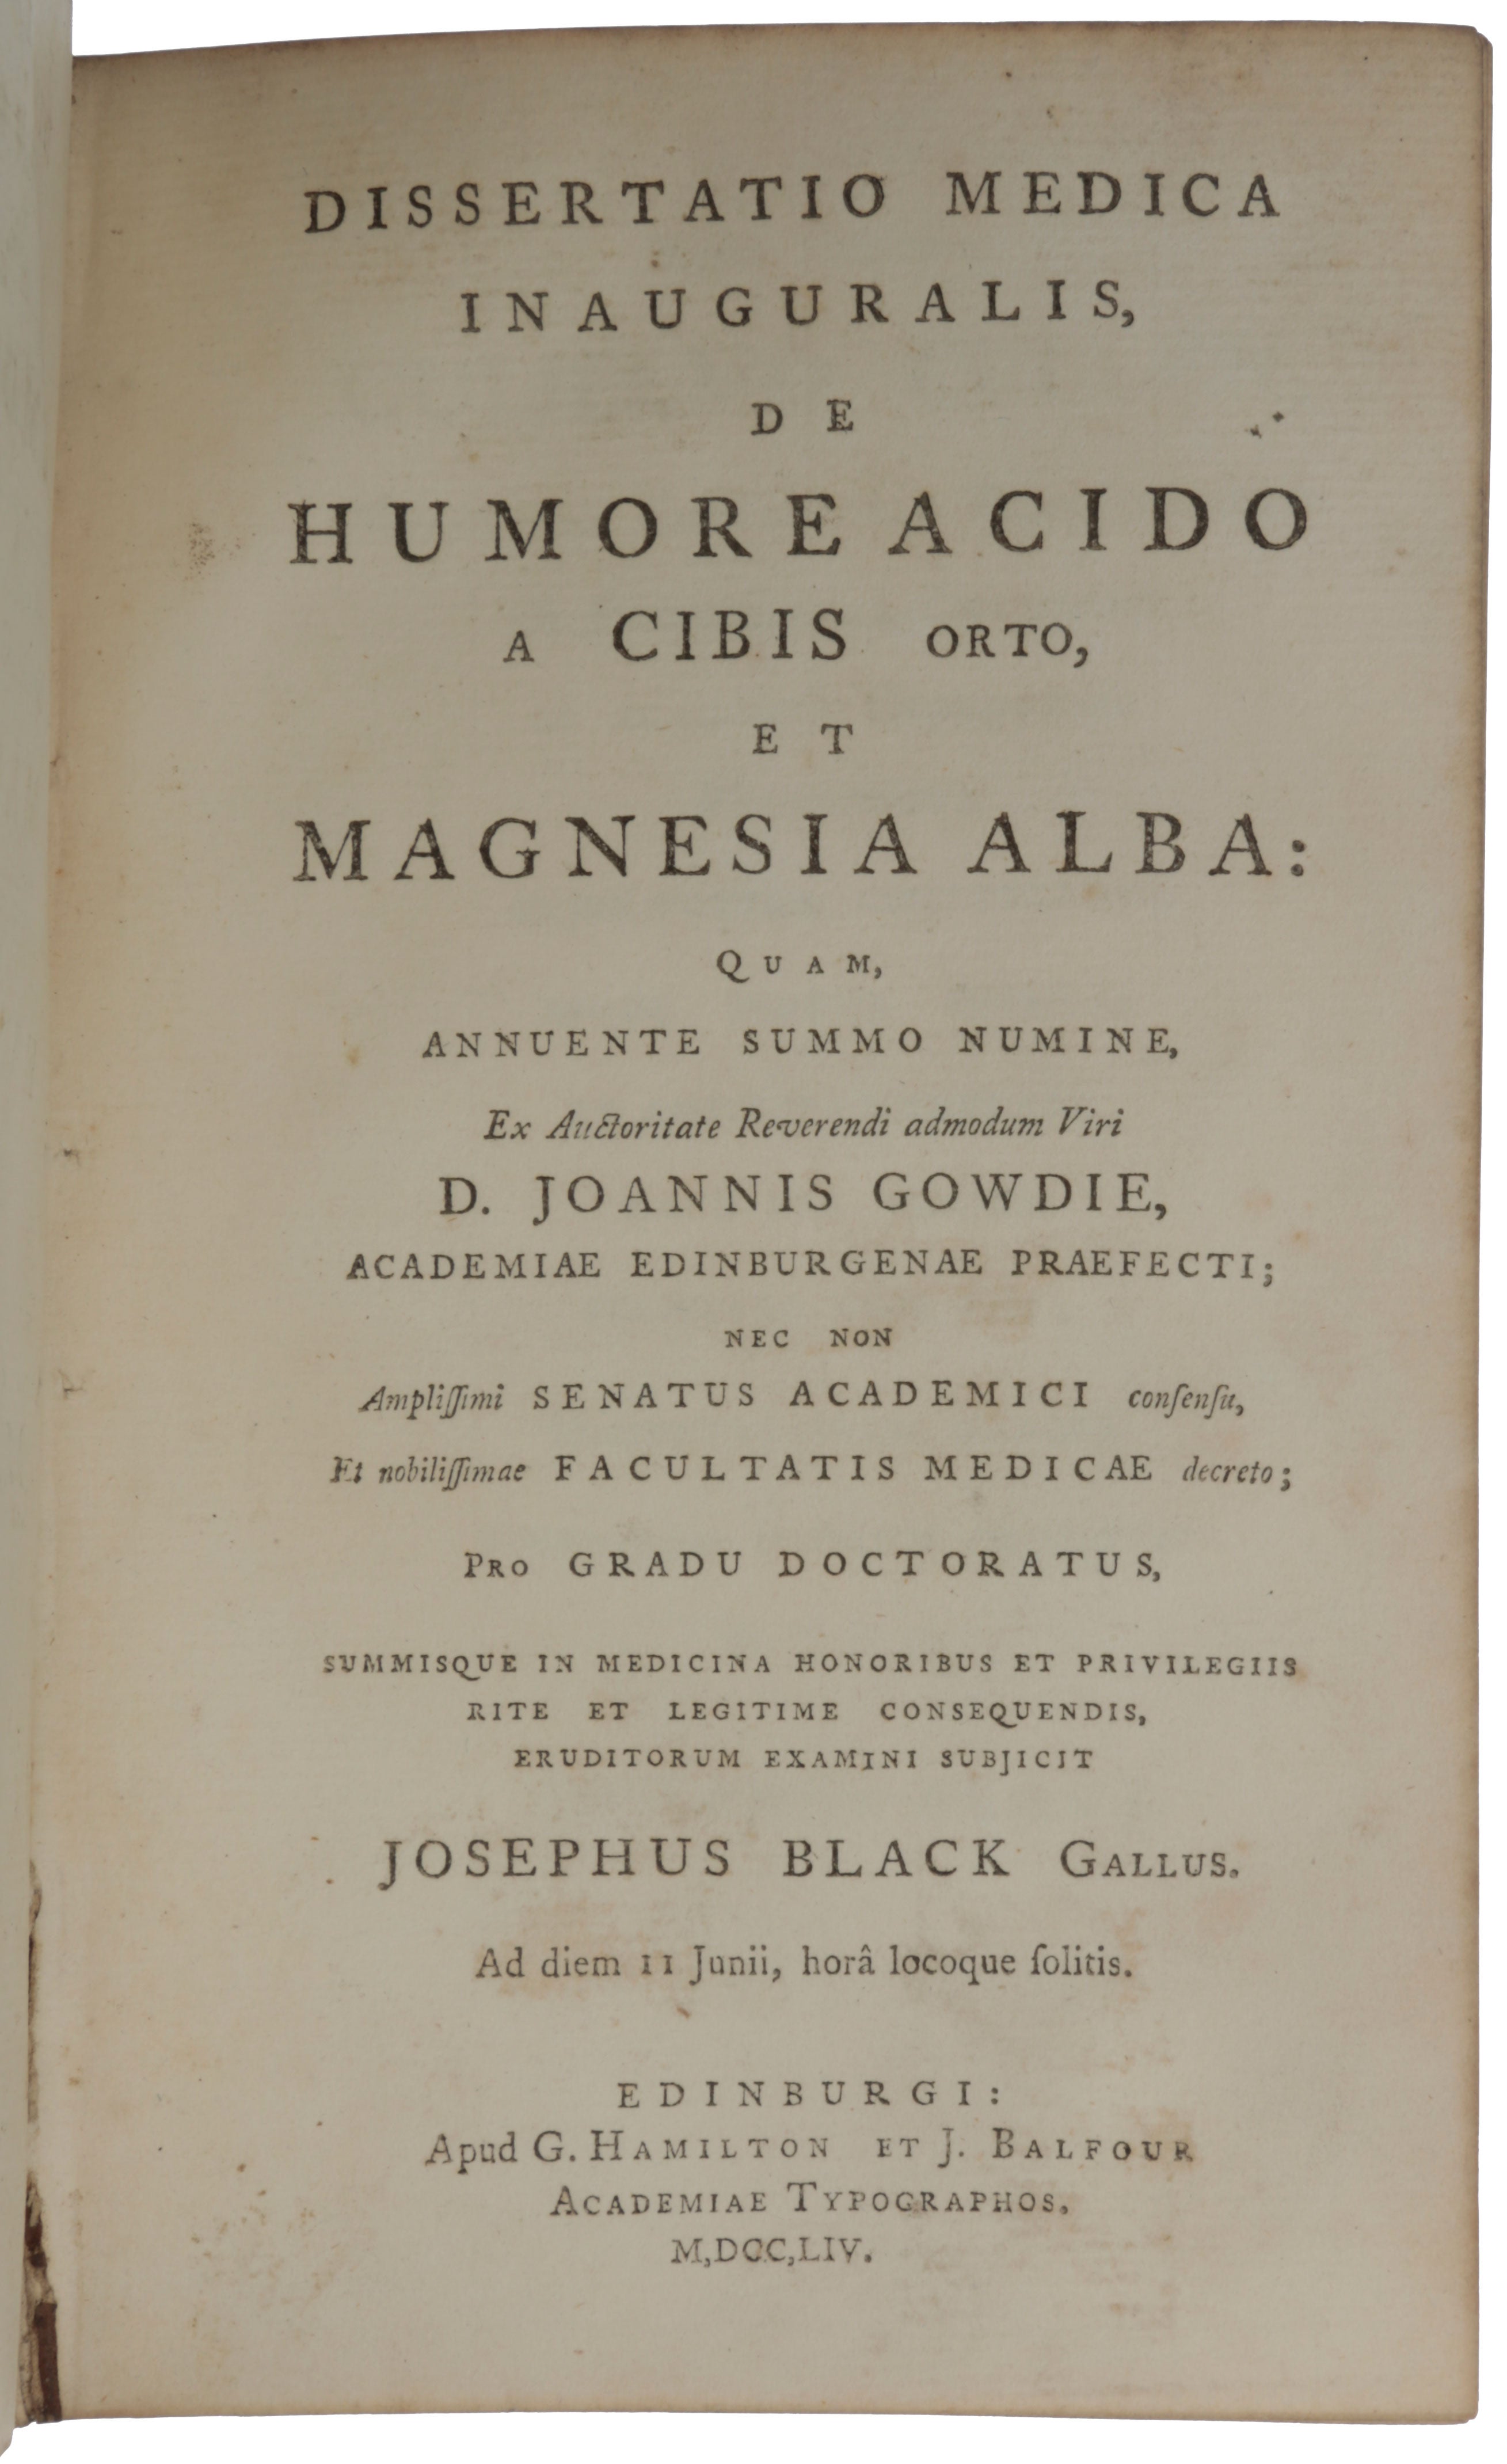 Item #5461 Dissertatio medica inauguralis, de humore acido a cibis orto, et magnesia alba... [Bound as the third item in a sammelband with eight other medical dissertations (listed below)]. Joseph BLACK.